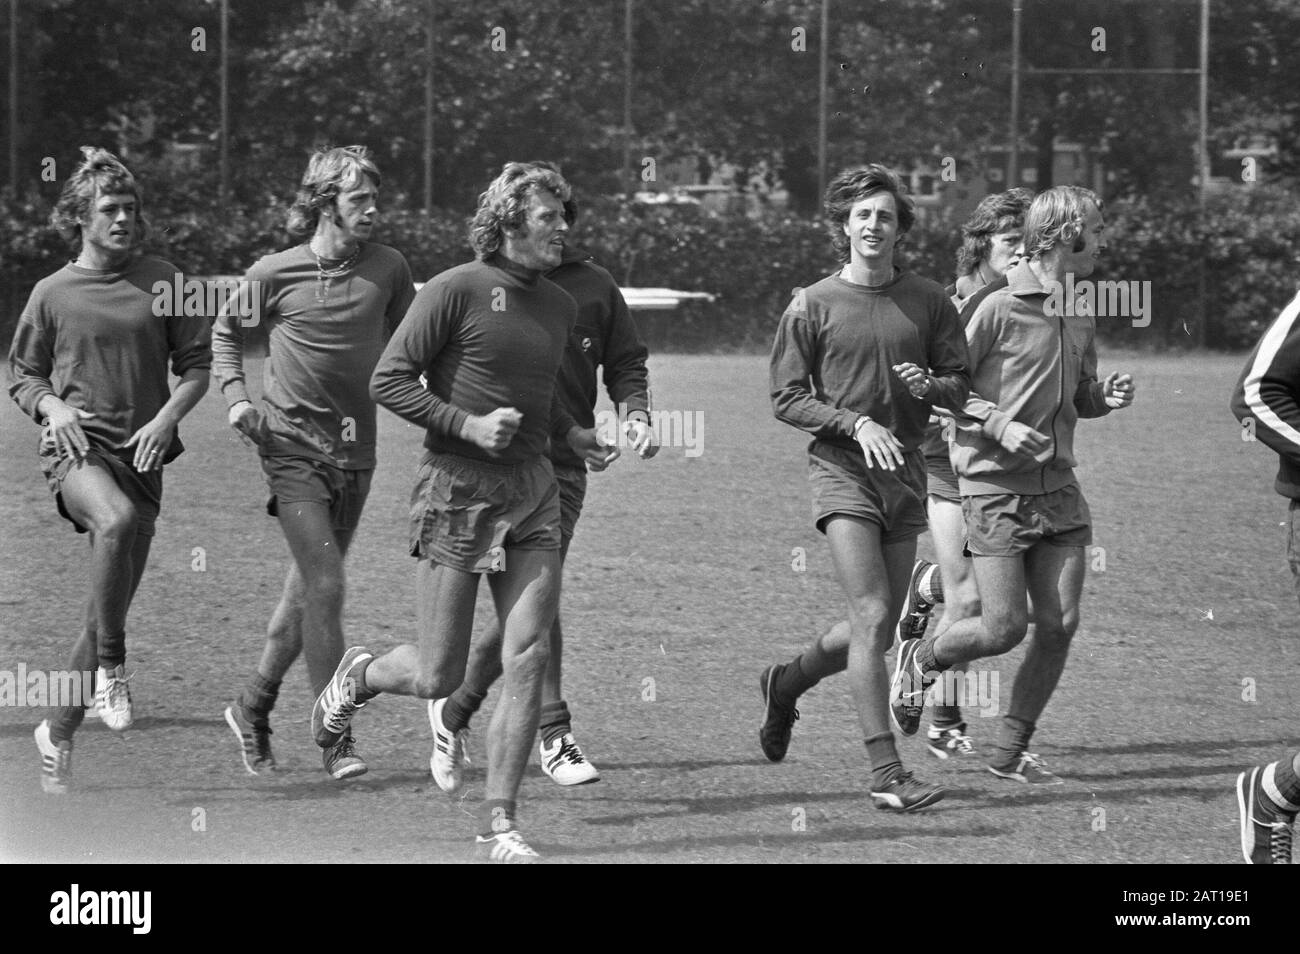 First training Ajax for new season, Piet Keizer (third from left) and Johan  Cruijff (fourth from left) during round running Annotation: Completely left  Johnny Rep Date: 14 July 1972 Keywords: sports training,